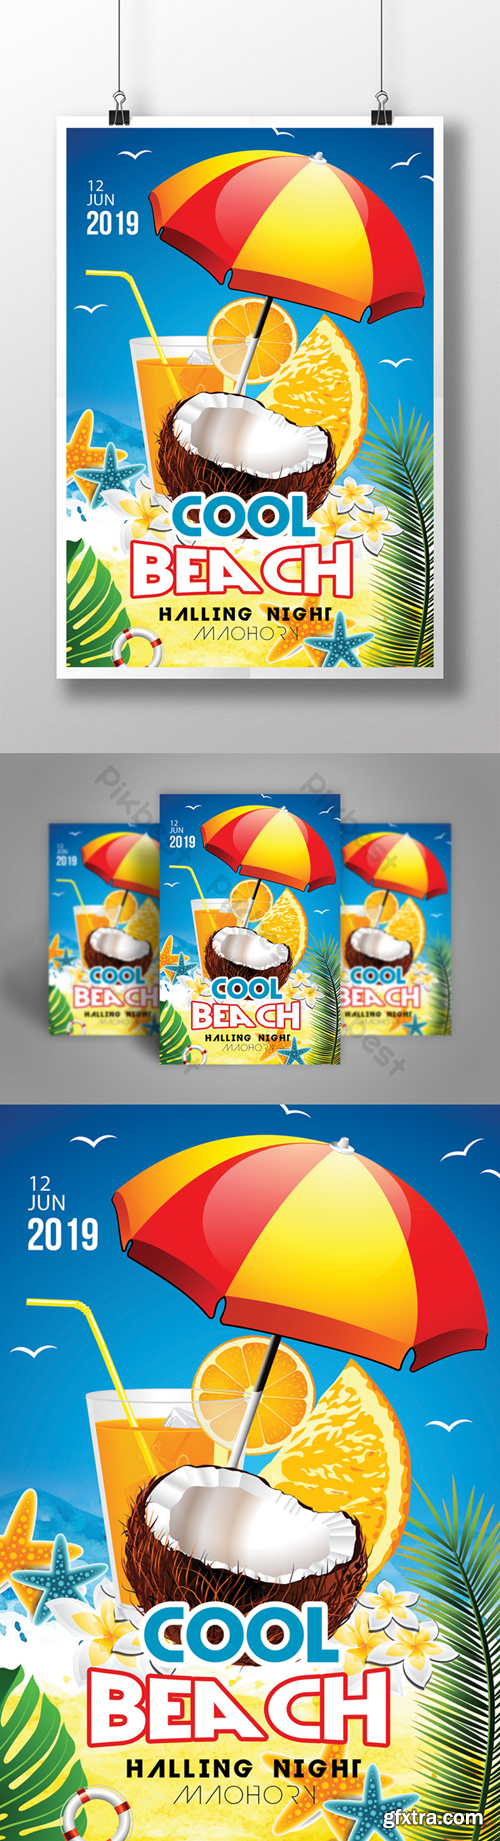 New Beach Party with Coconut Orange and Juice Flyer Template Template PSD